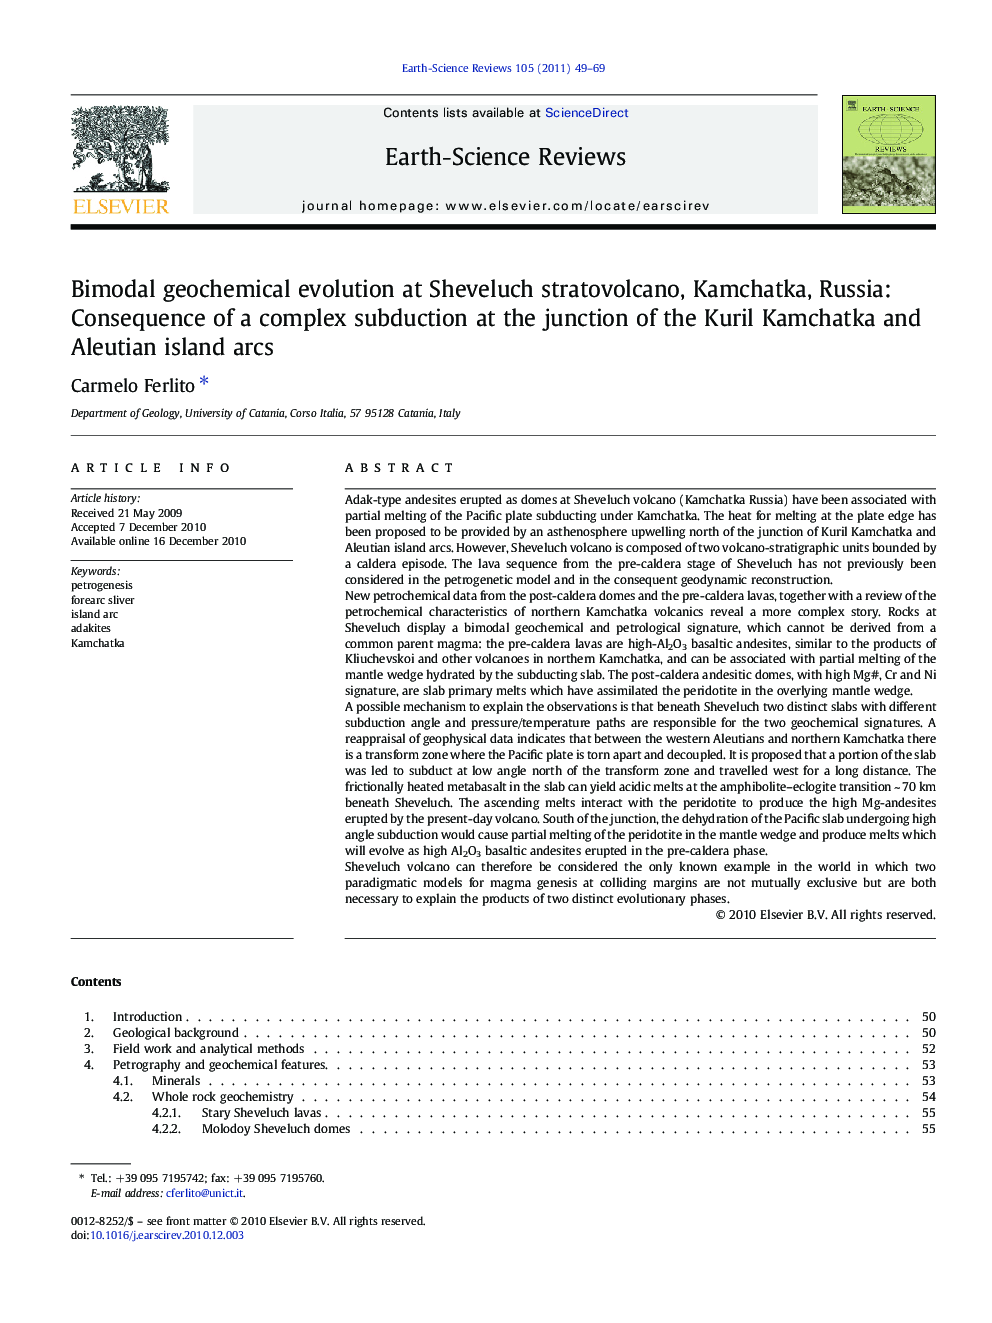 Bimodal geochemical evolution at Sheveluch stratovolcano, Kamchatka, Russia: Consequence of a complex subduction at the junction of the Kuril Kamchatka and Aleutian island arcs